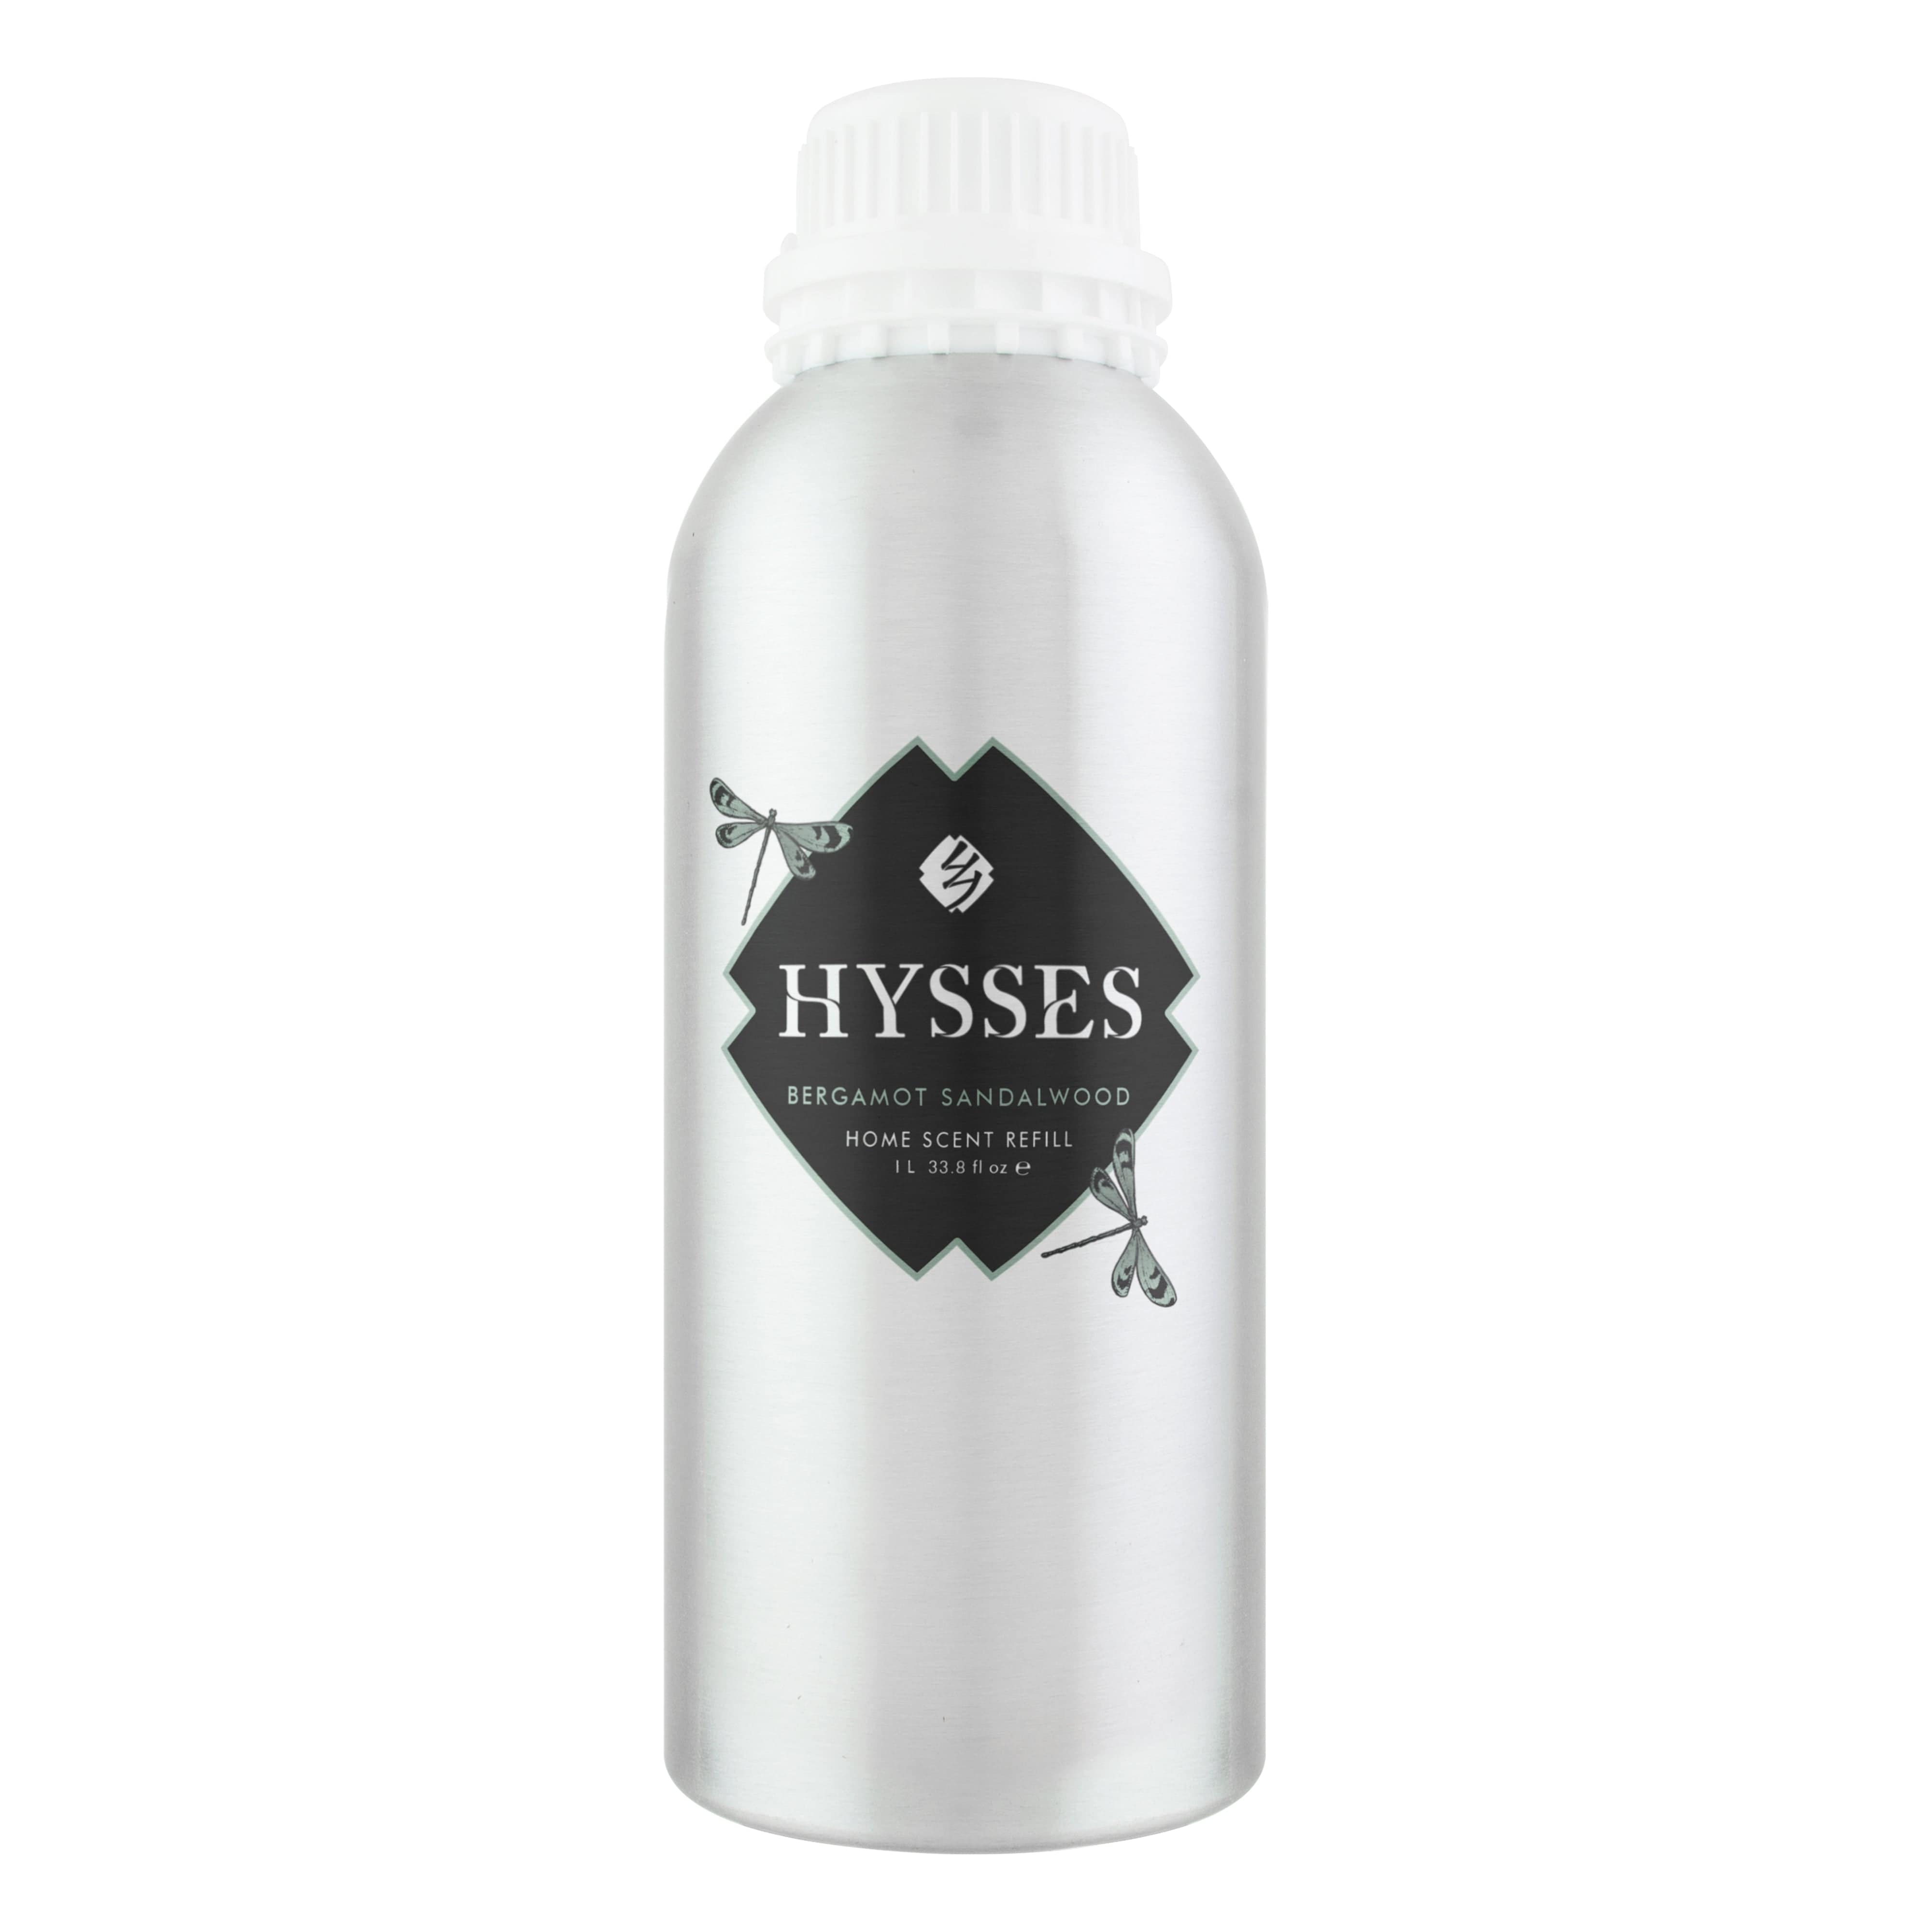 Hysses Home Scents 1000ml Refill Home Scent Reed Diffuser Bergamot Sandalwood